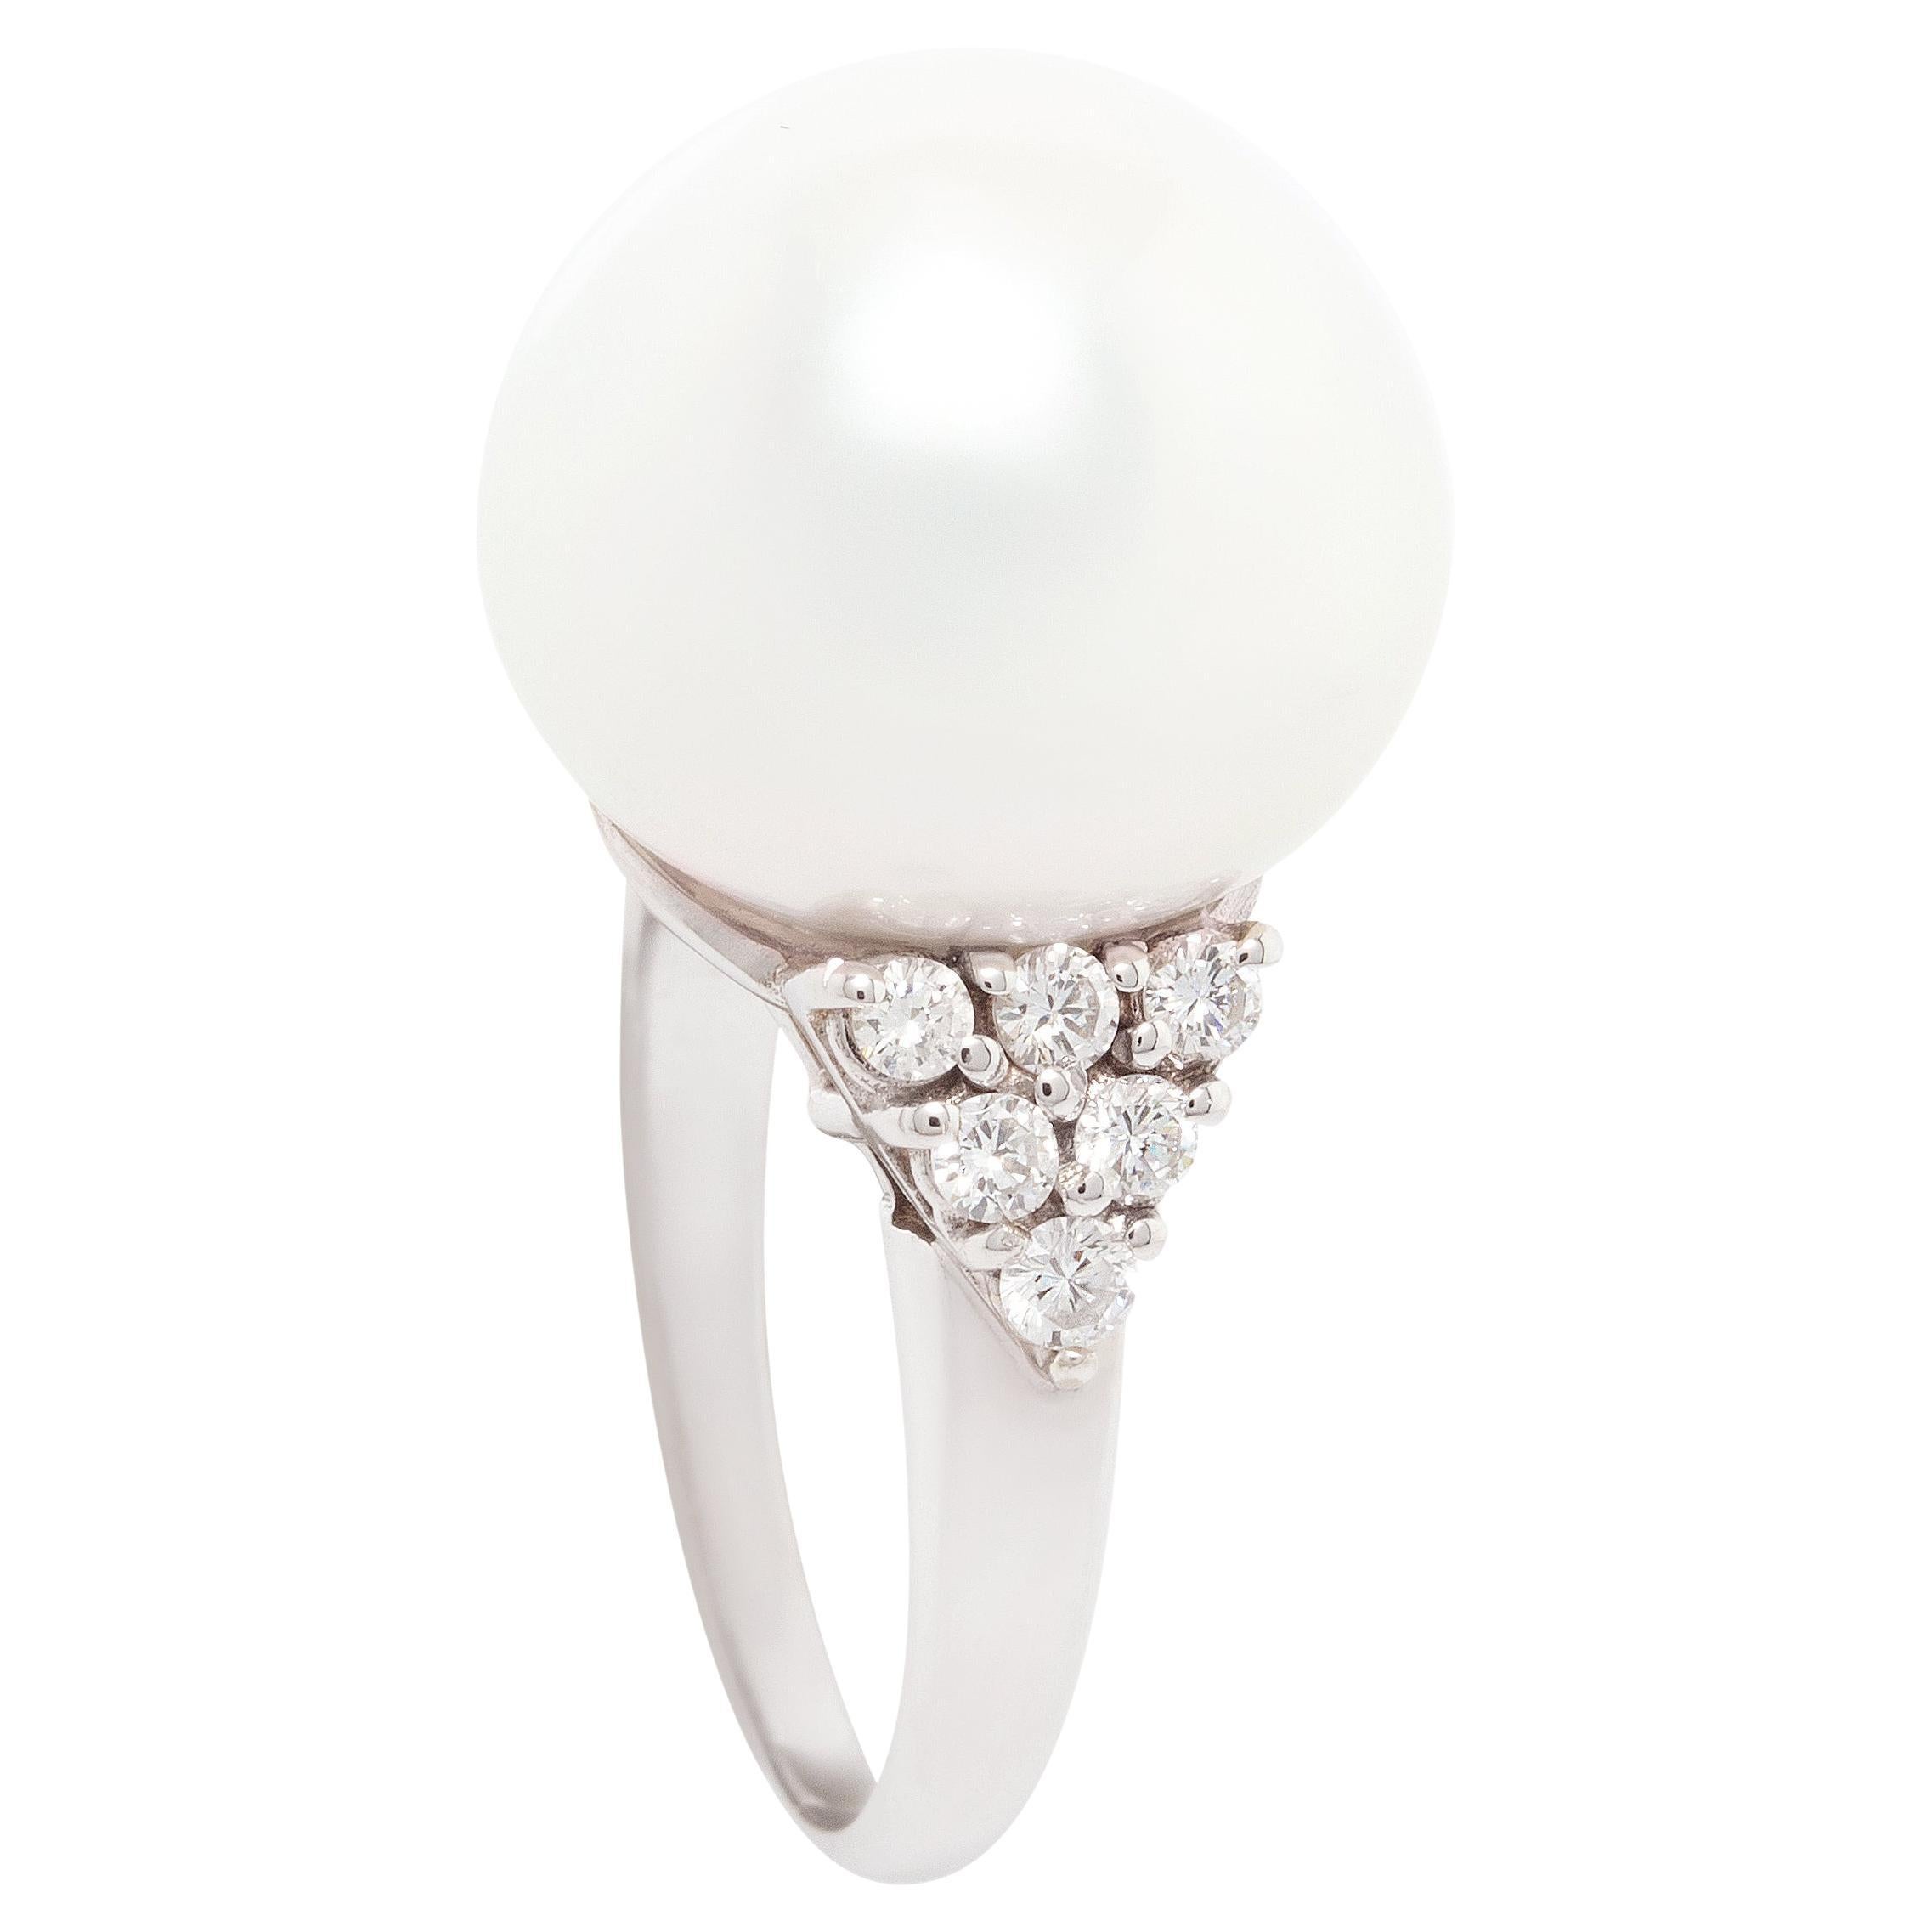 Ella Gafter 16mm South Sea Pearl and Diamond Ring